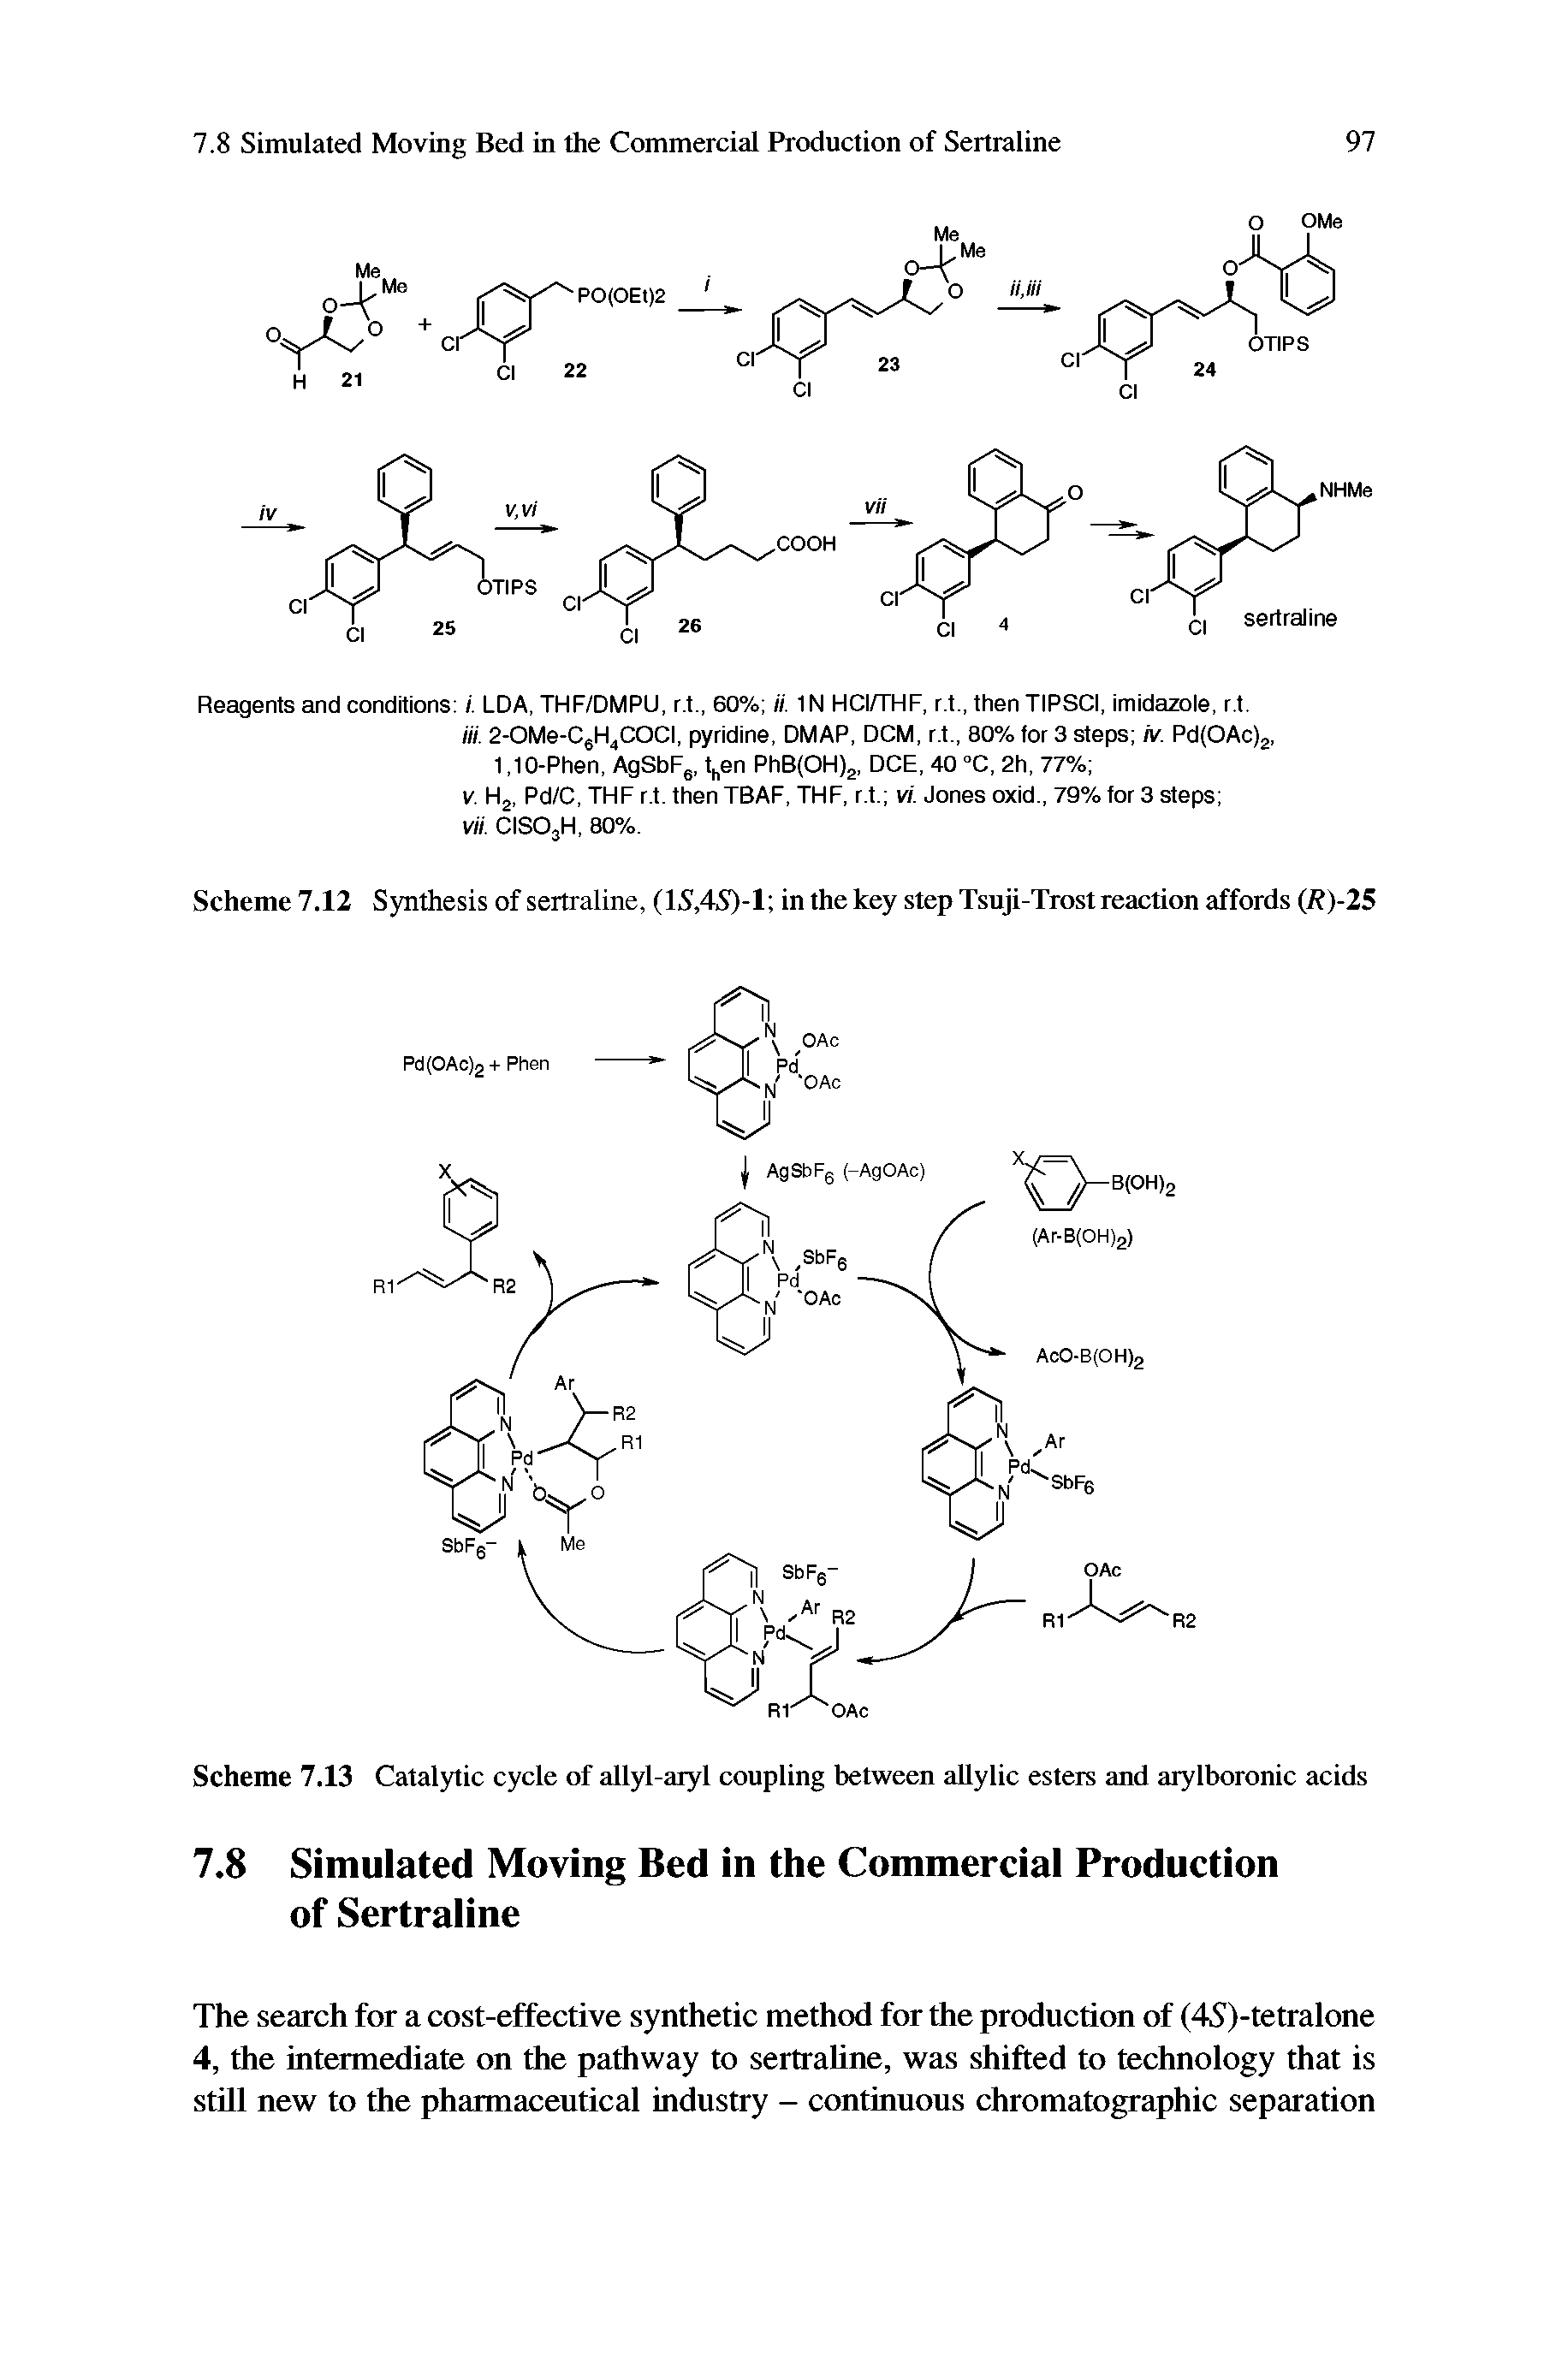 Scheme 7.12 Synthesis of sertraline, (1S,4S)-1 in the key step Tsuji-Trost reaction affords (R)-25...